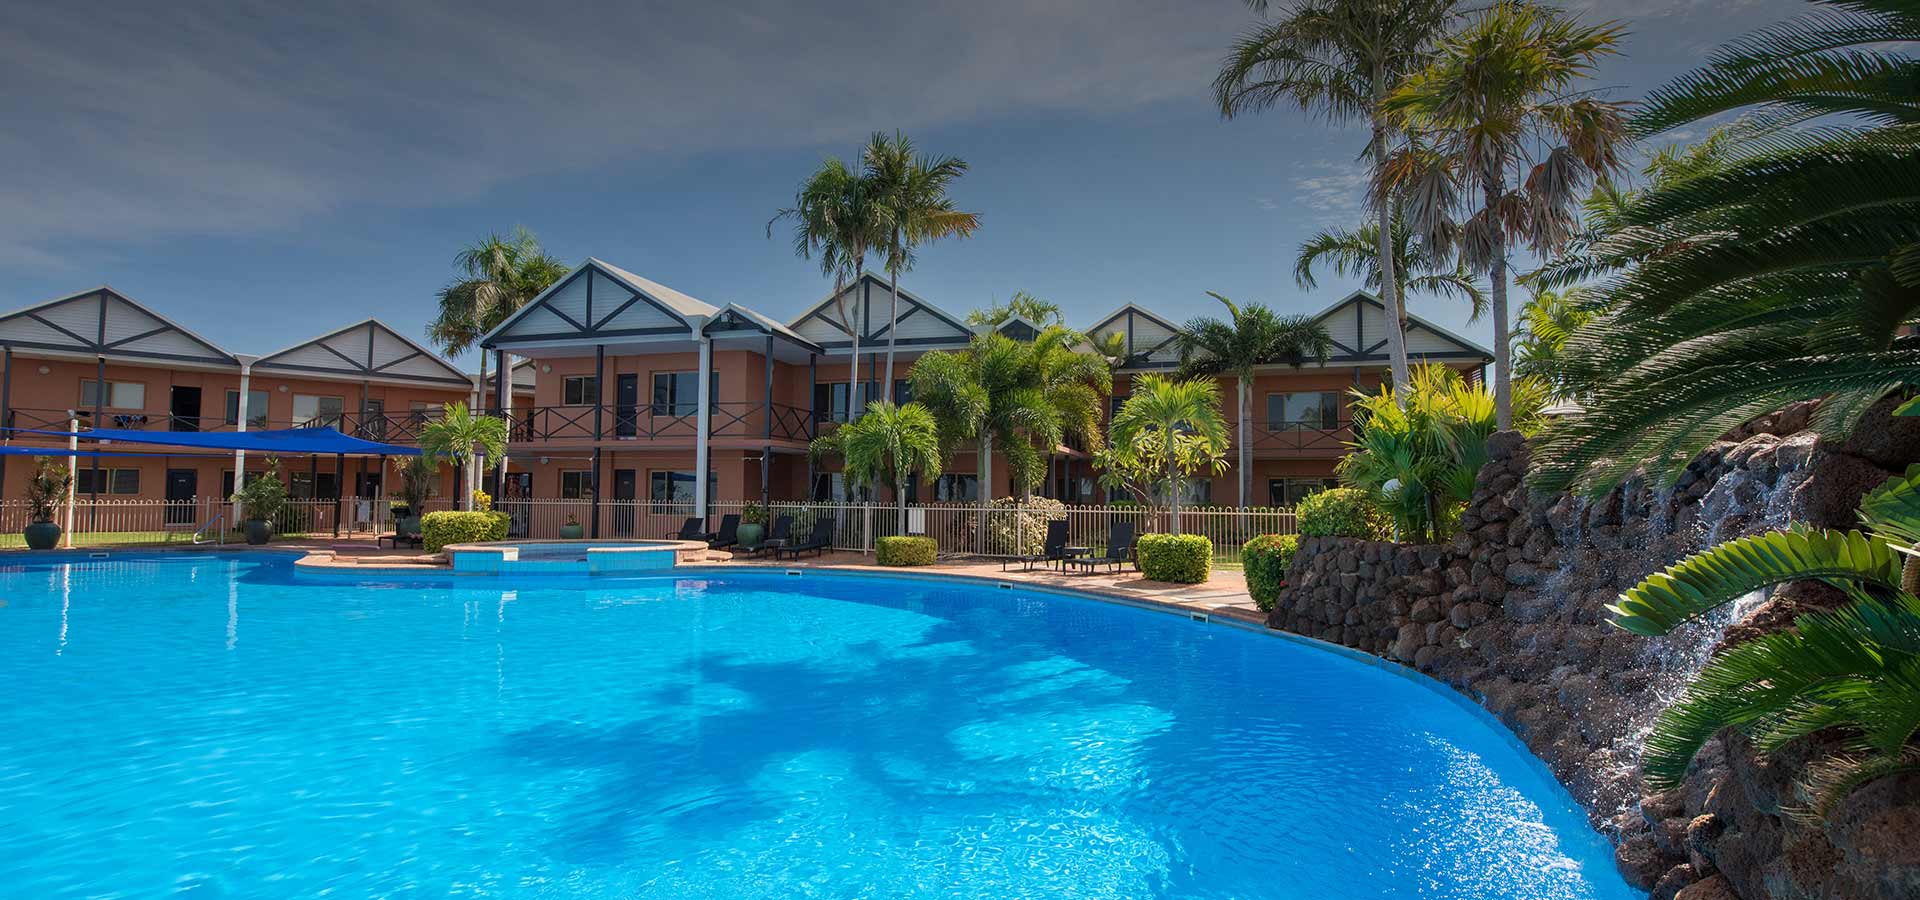 The Place to Stay in Broome